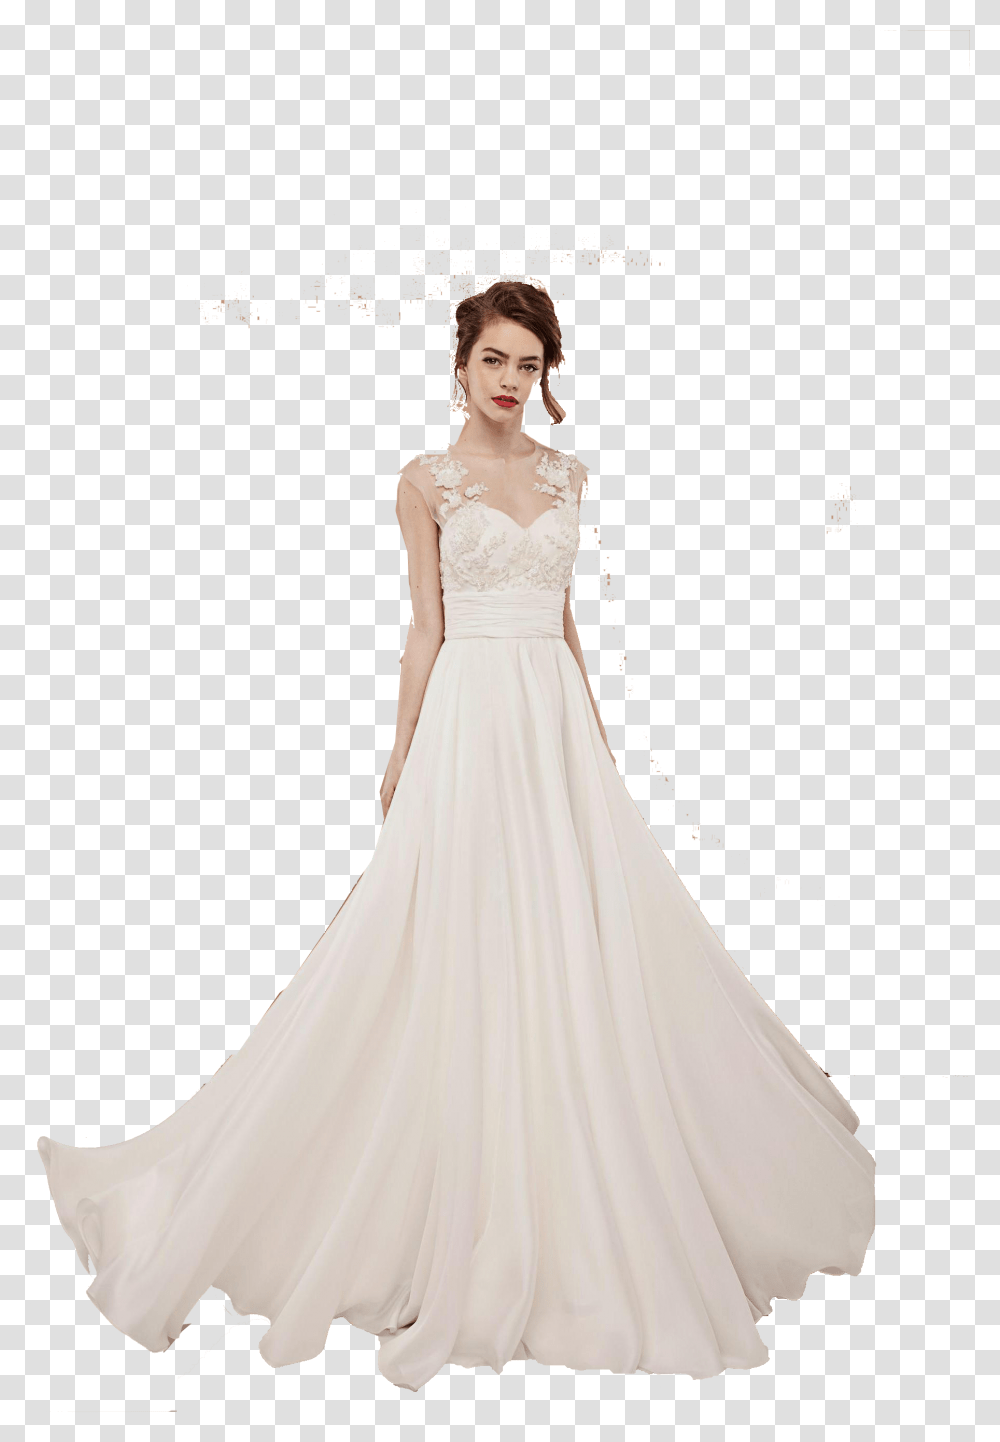 Asian Bridal Gowns Image File Gown, Apparel, Wedding Gown, Robe Transparent Png